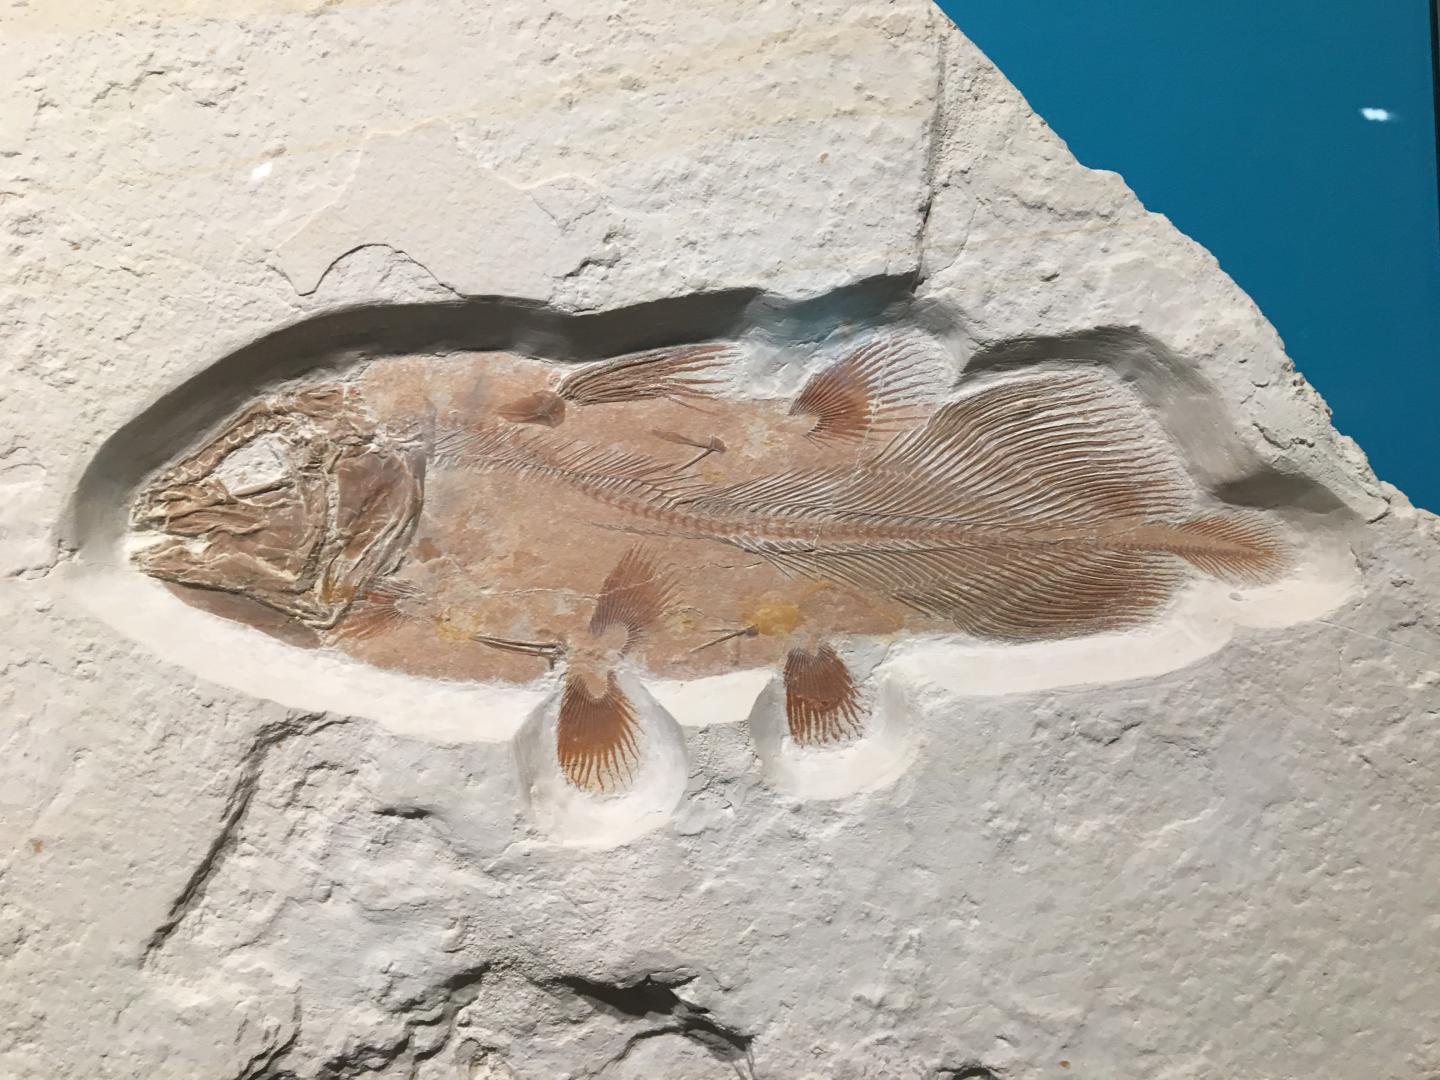 Fossil coelacanth